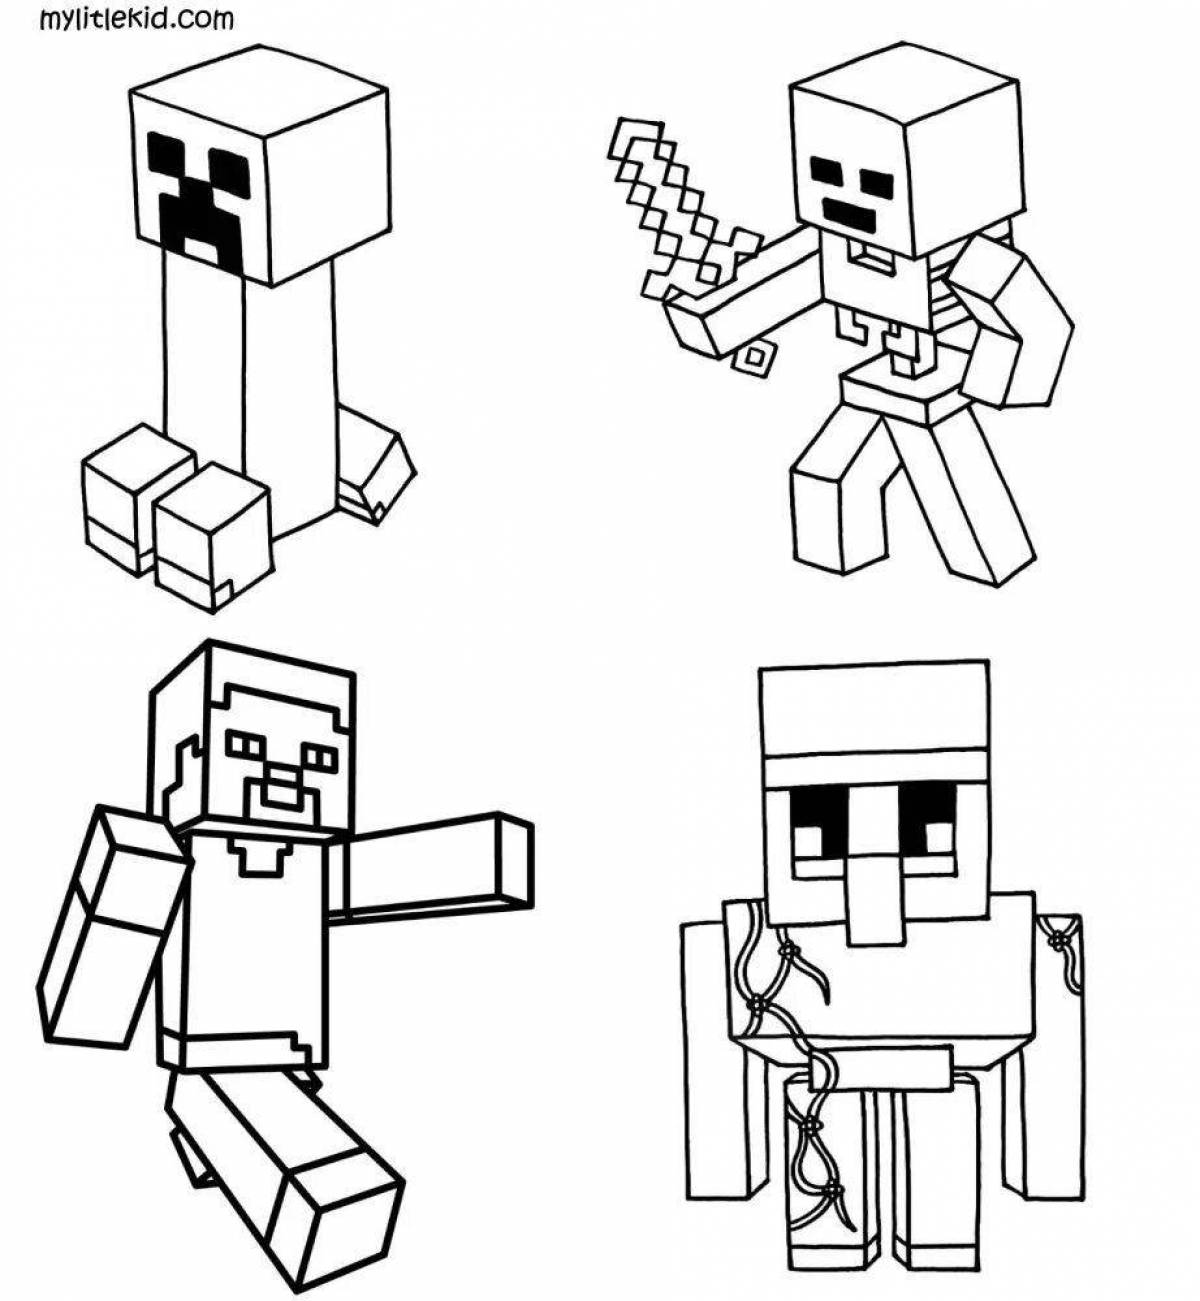 Attractive minecraft dog coloring page